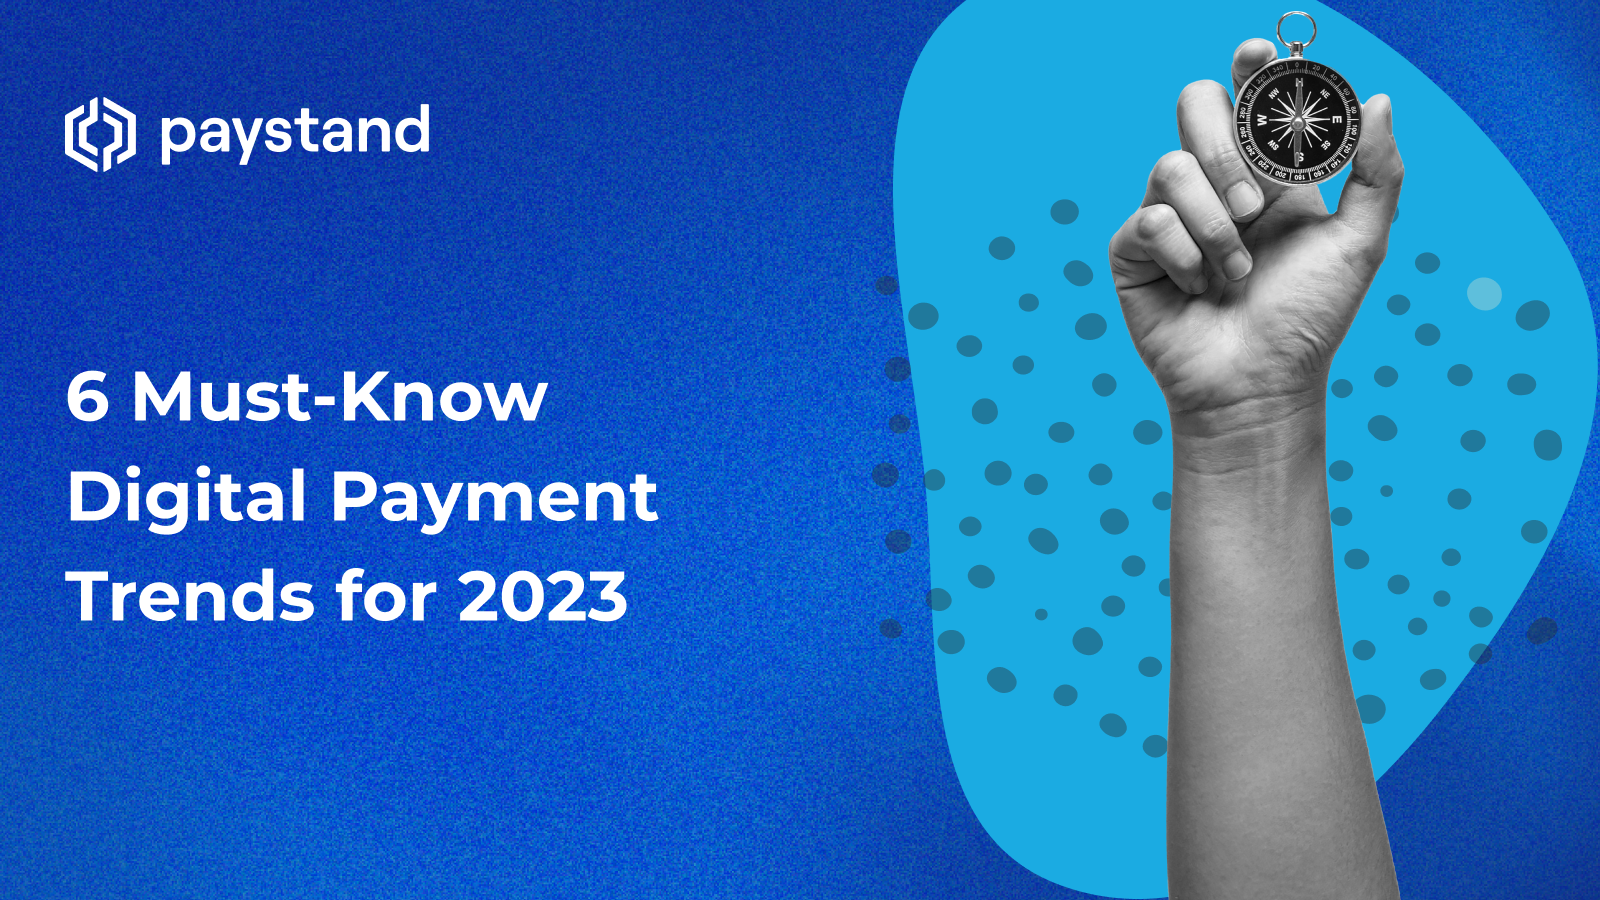 6 Must-Know Digital Payment Trends for 2023